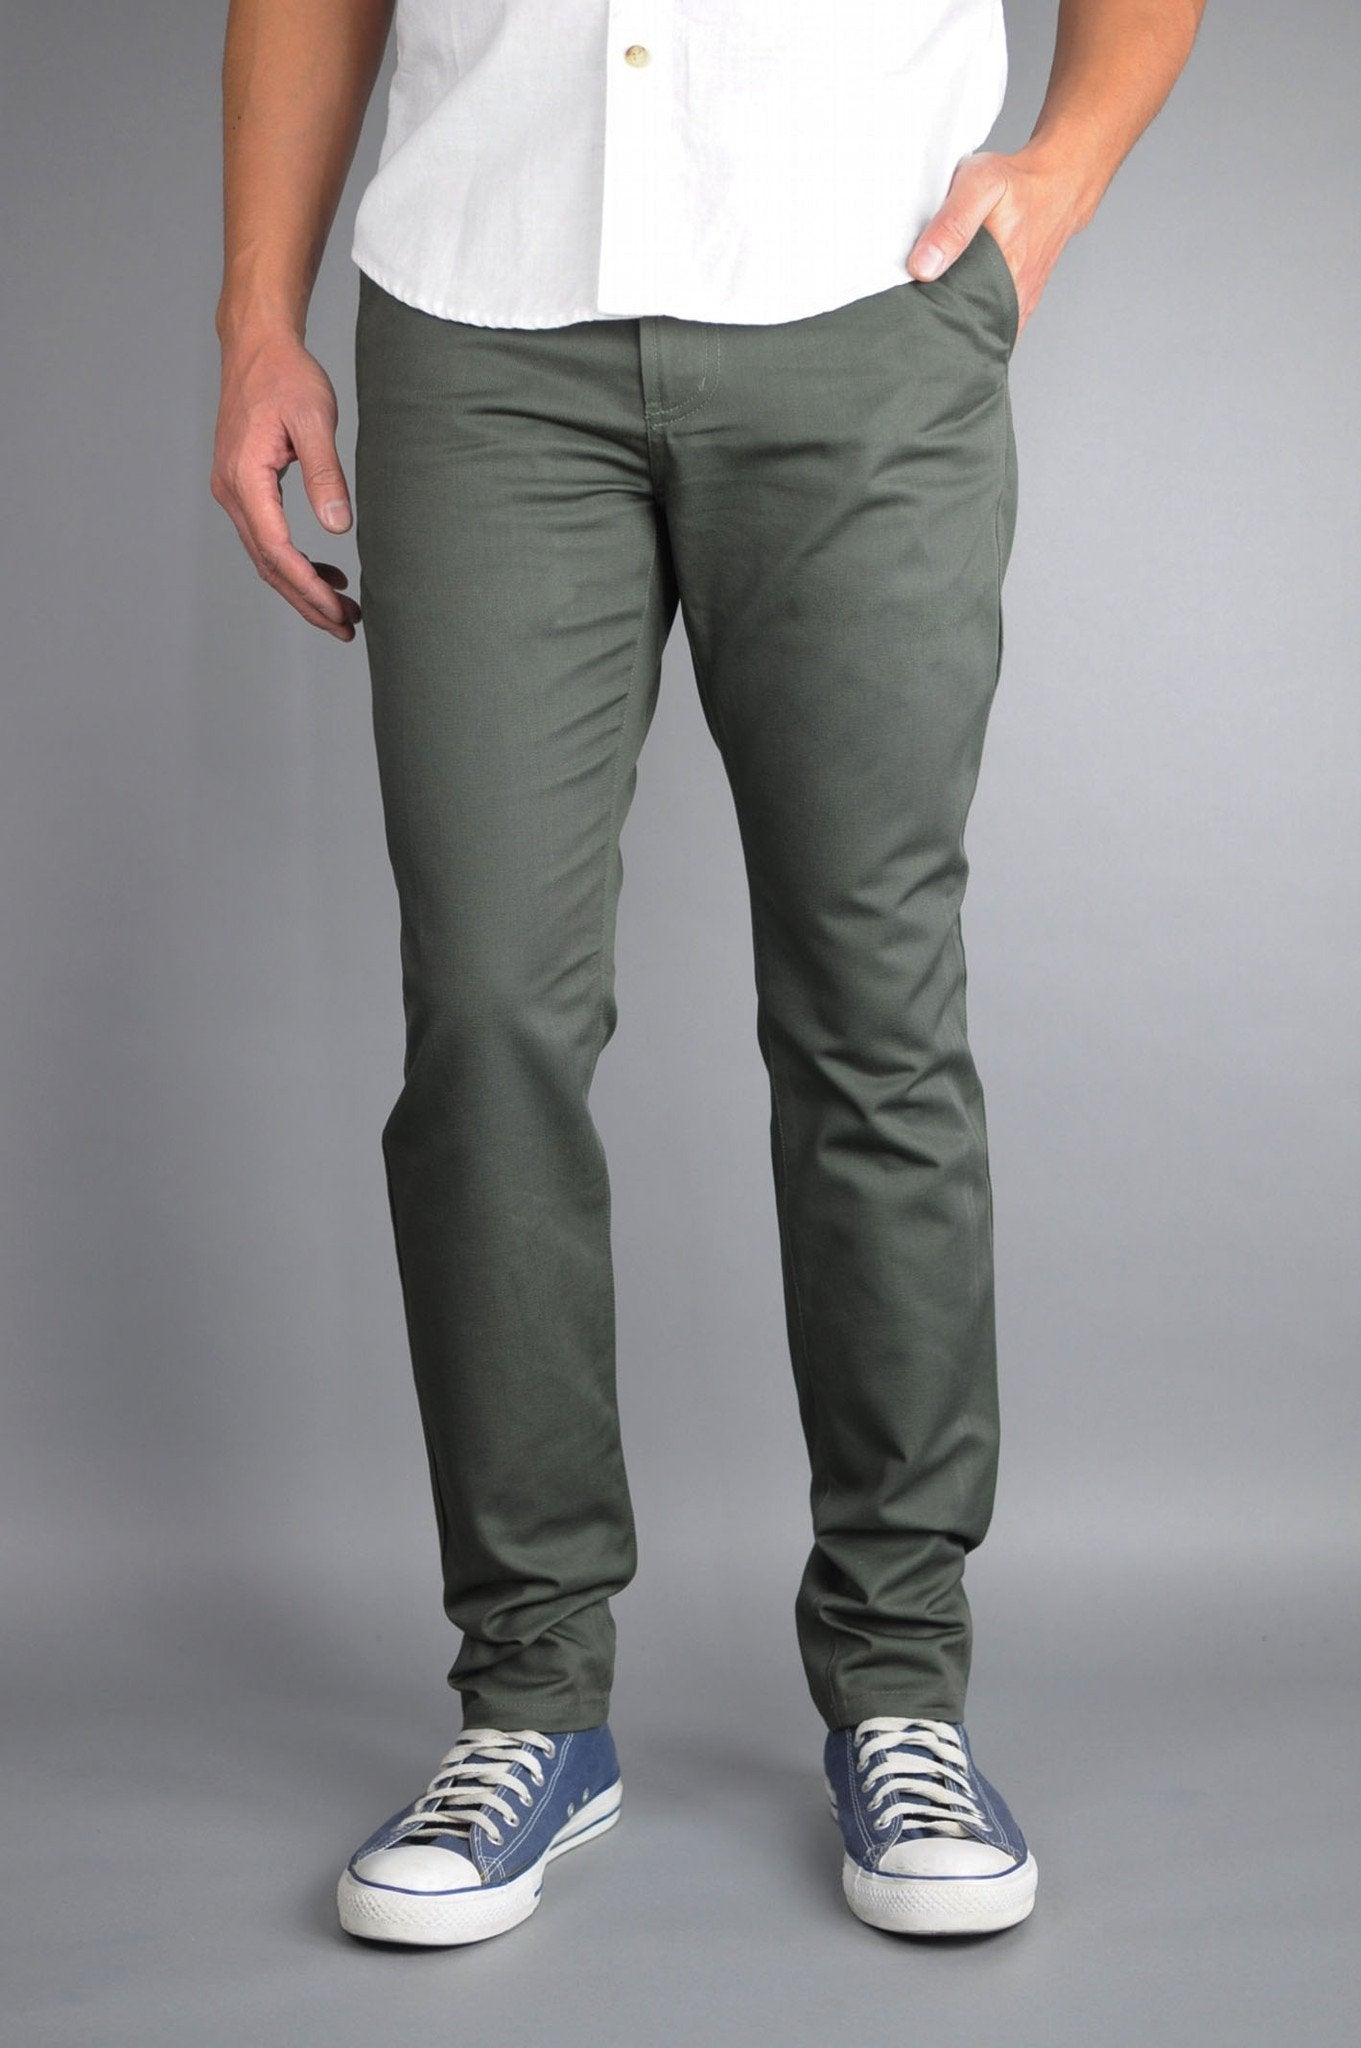 Neo Blue Jeans Army Green Chino Pants